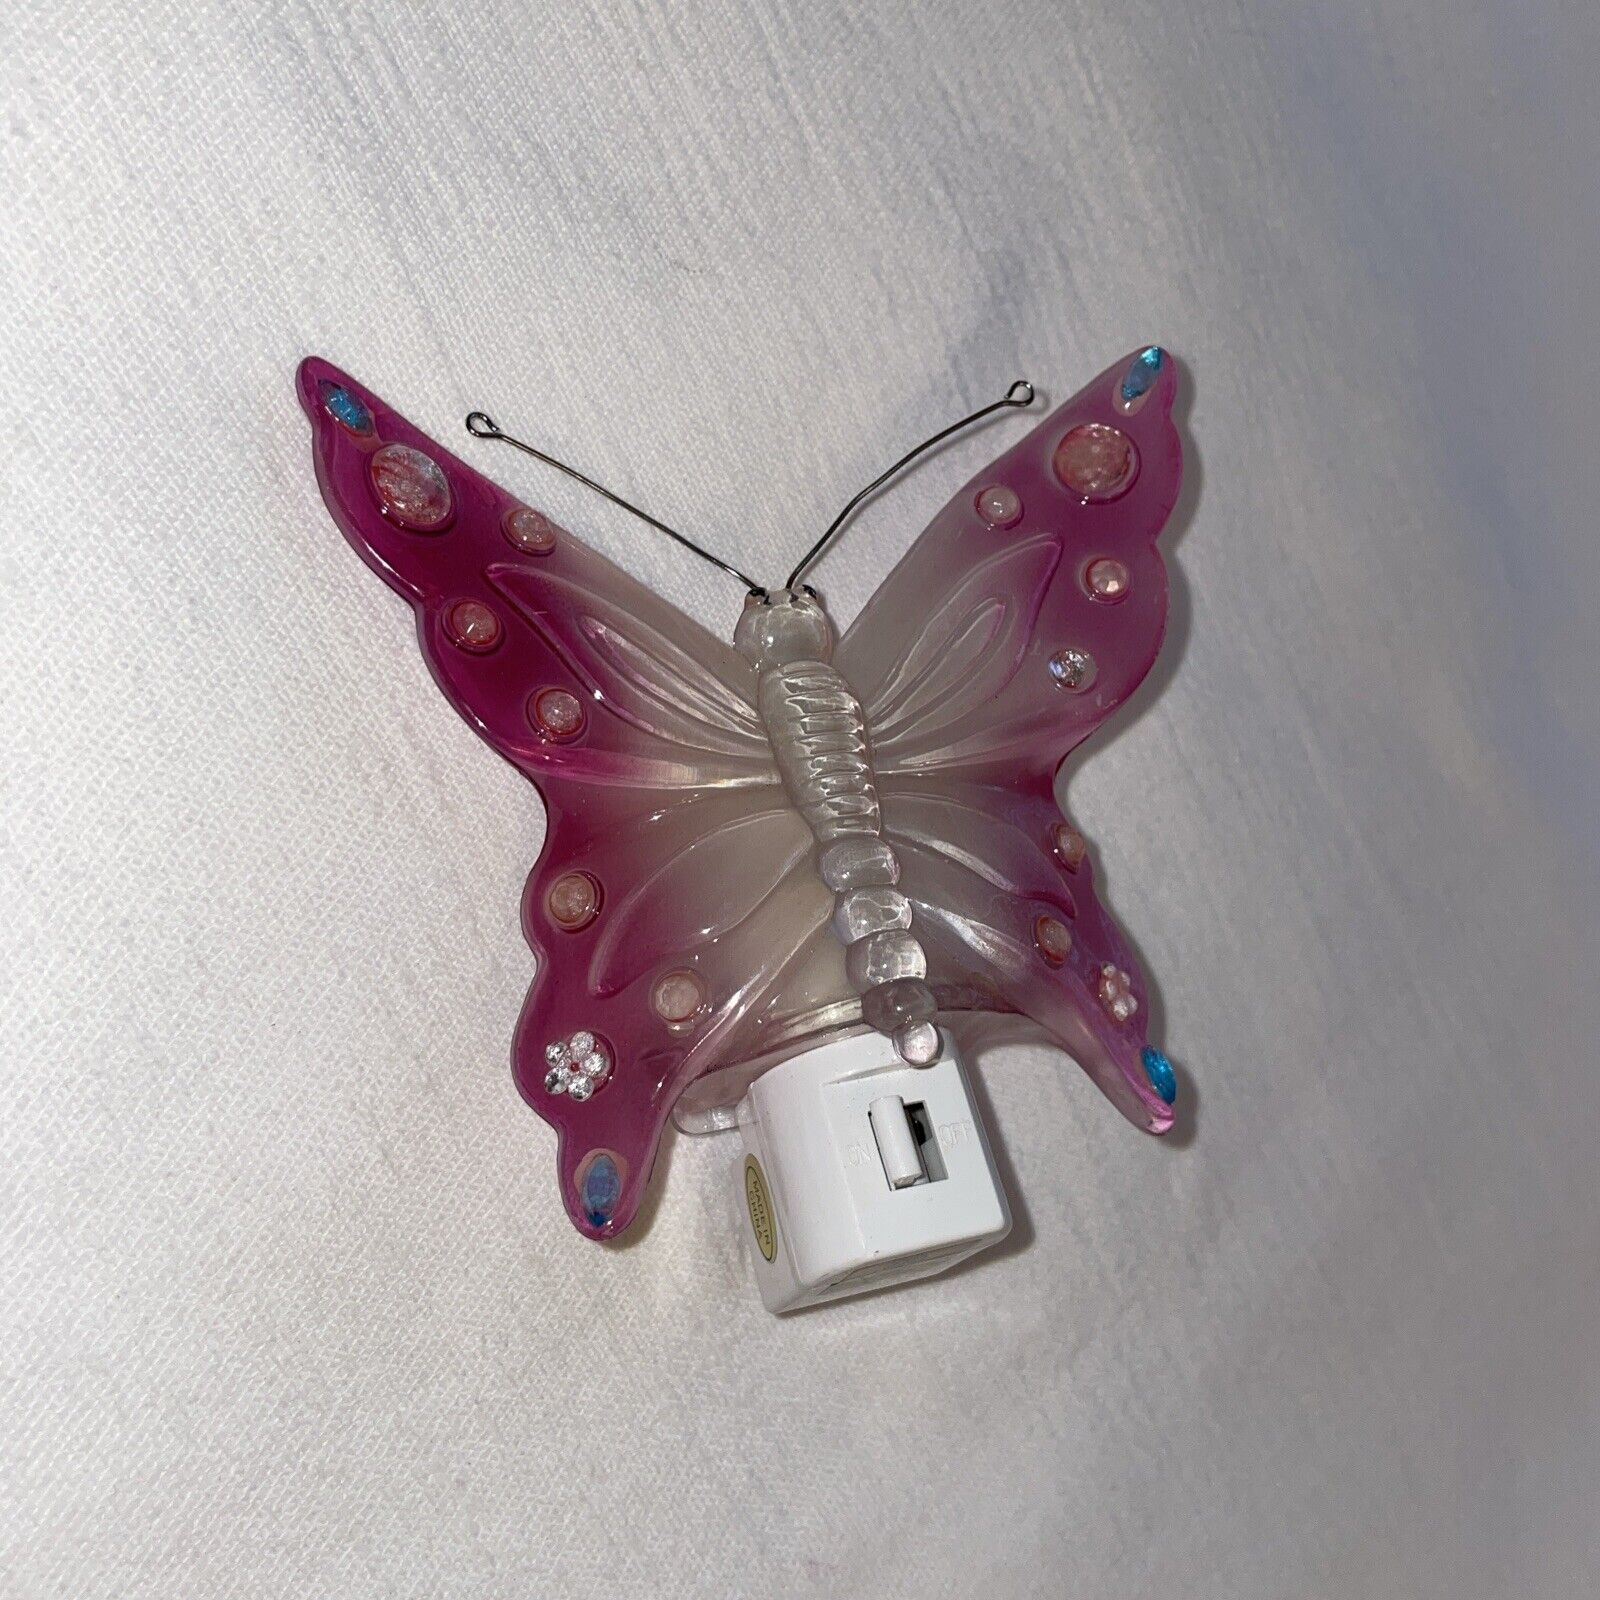 Adorable pink and blue butterfly nightlight